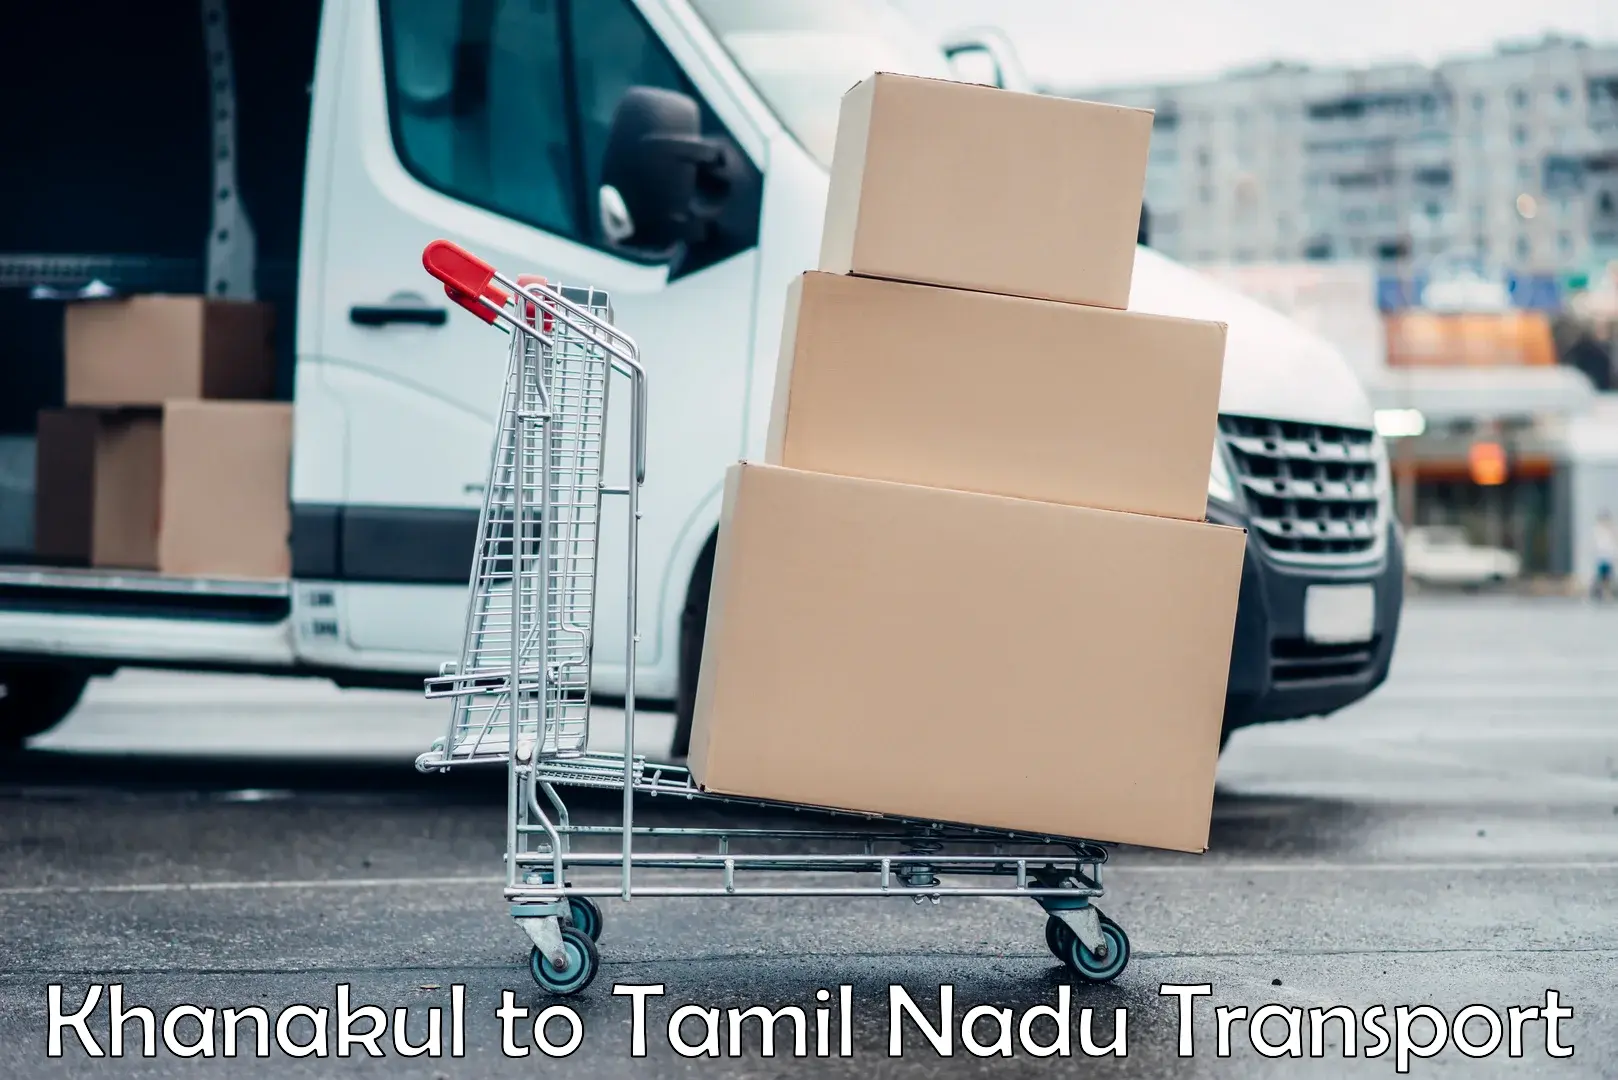 Nearby transport service in Khanakul to Tiruppur